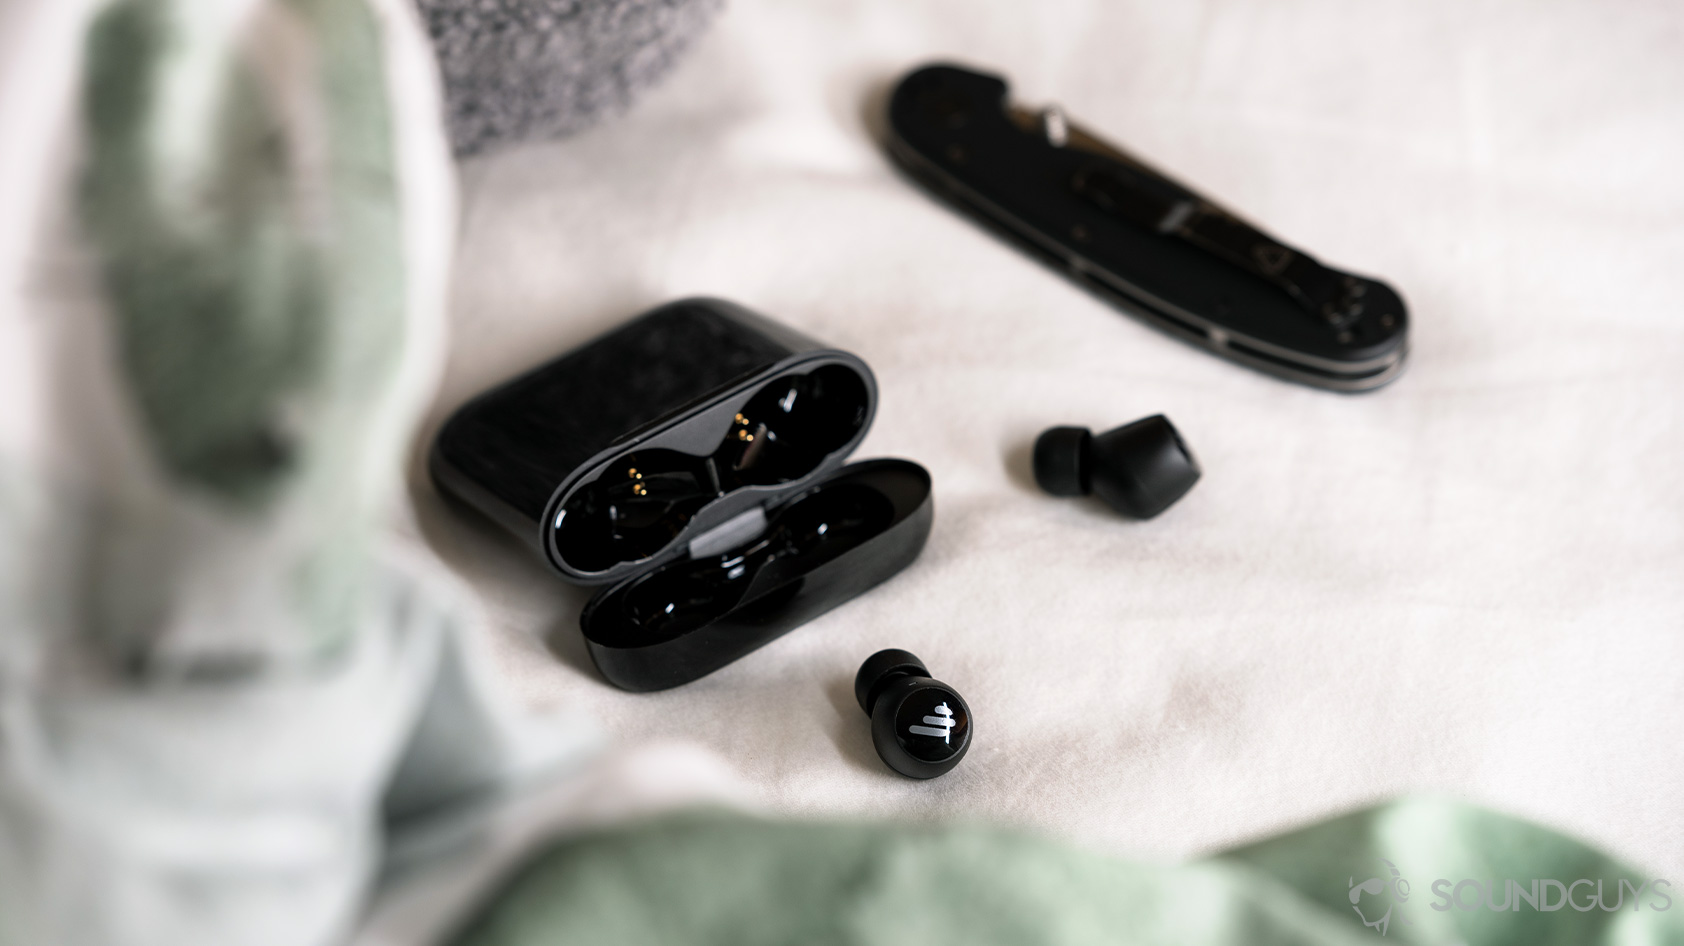 A picture of the Edifier TWS6 true wireless earbuds outside of the open charging case next to a pocket knife on a white bedspread.